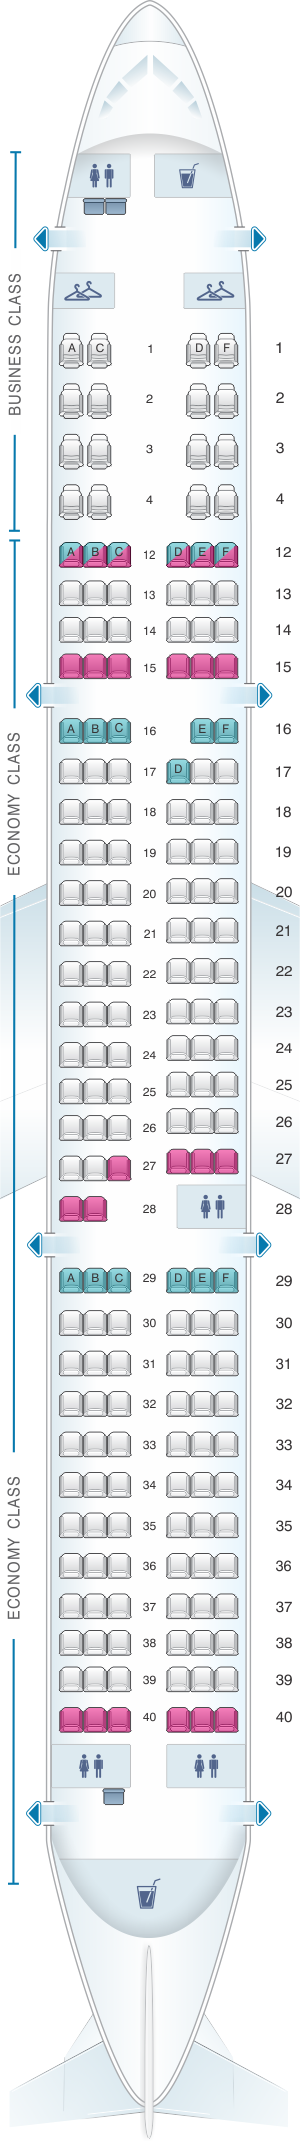 Seat map for Air Canada Airbus A321 200 Layout 2